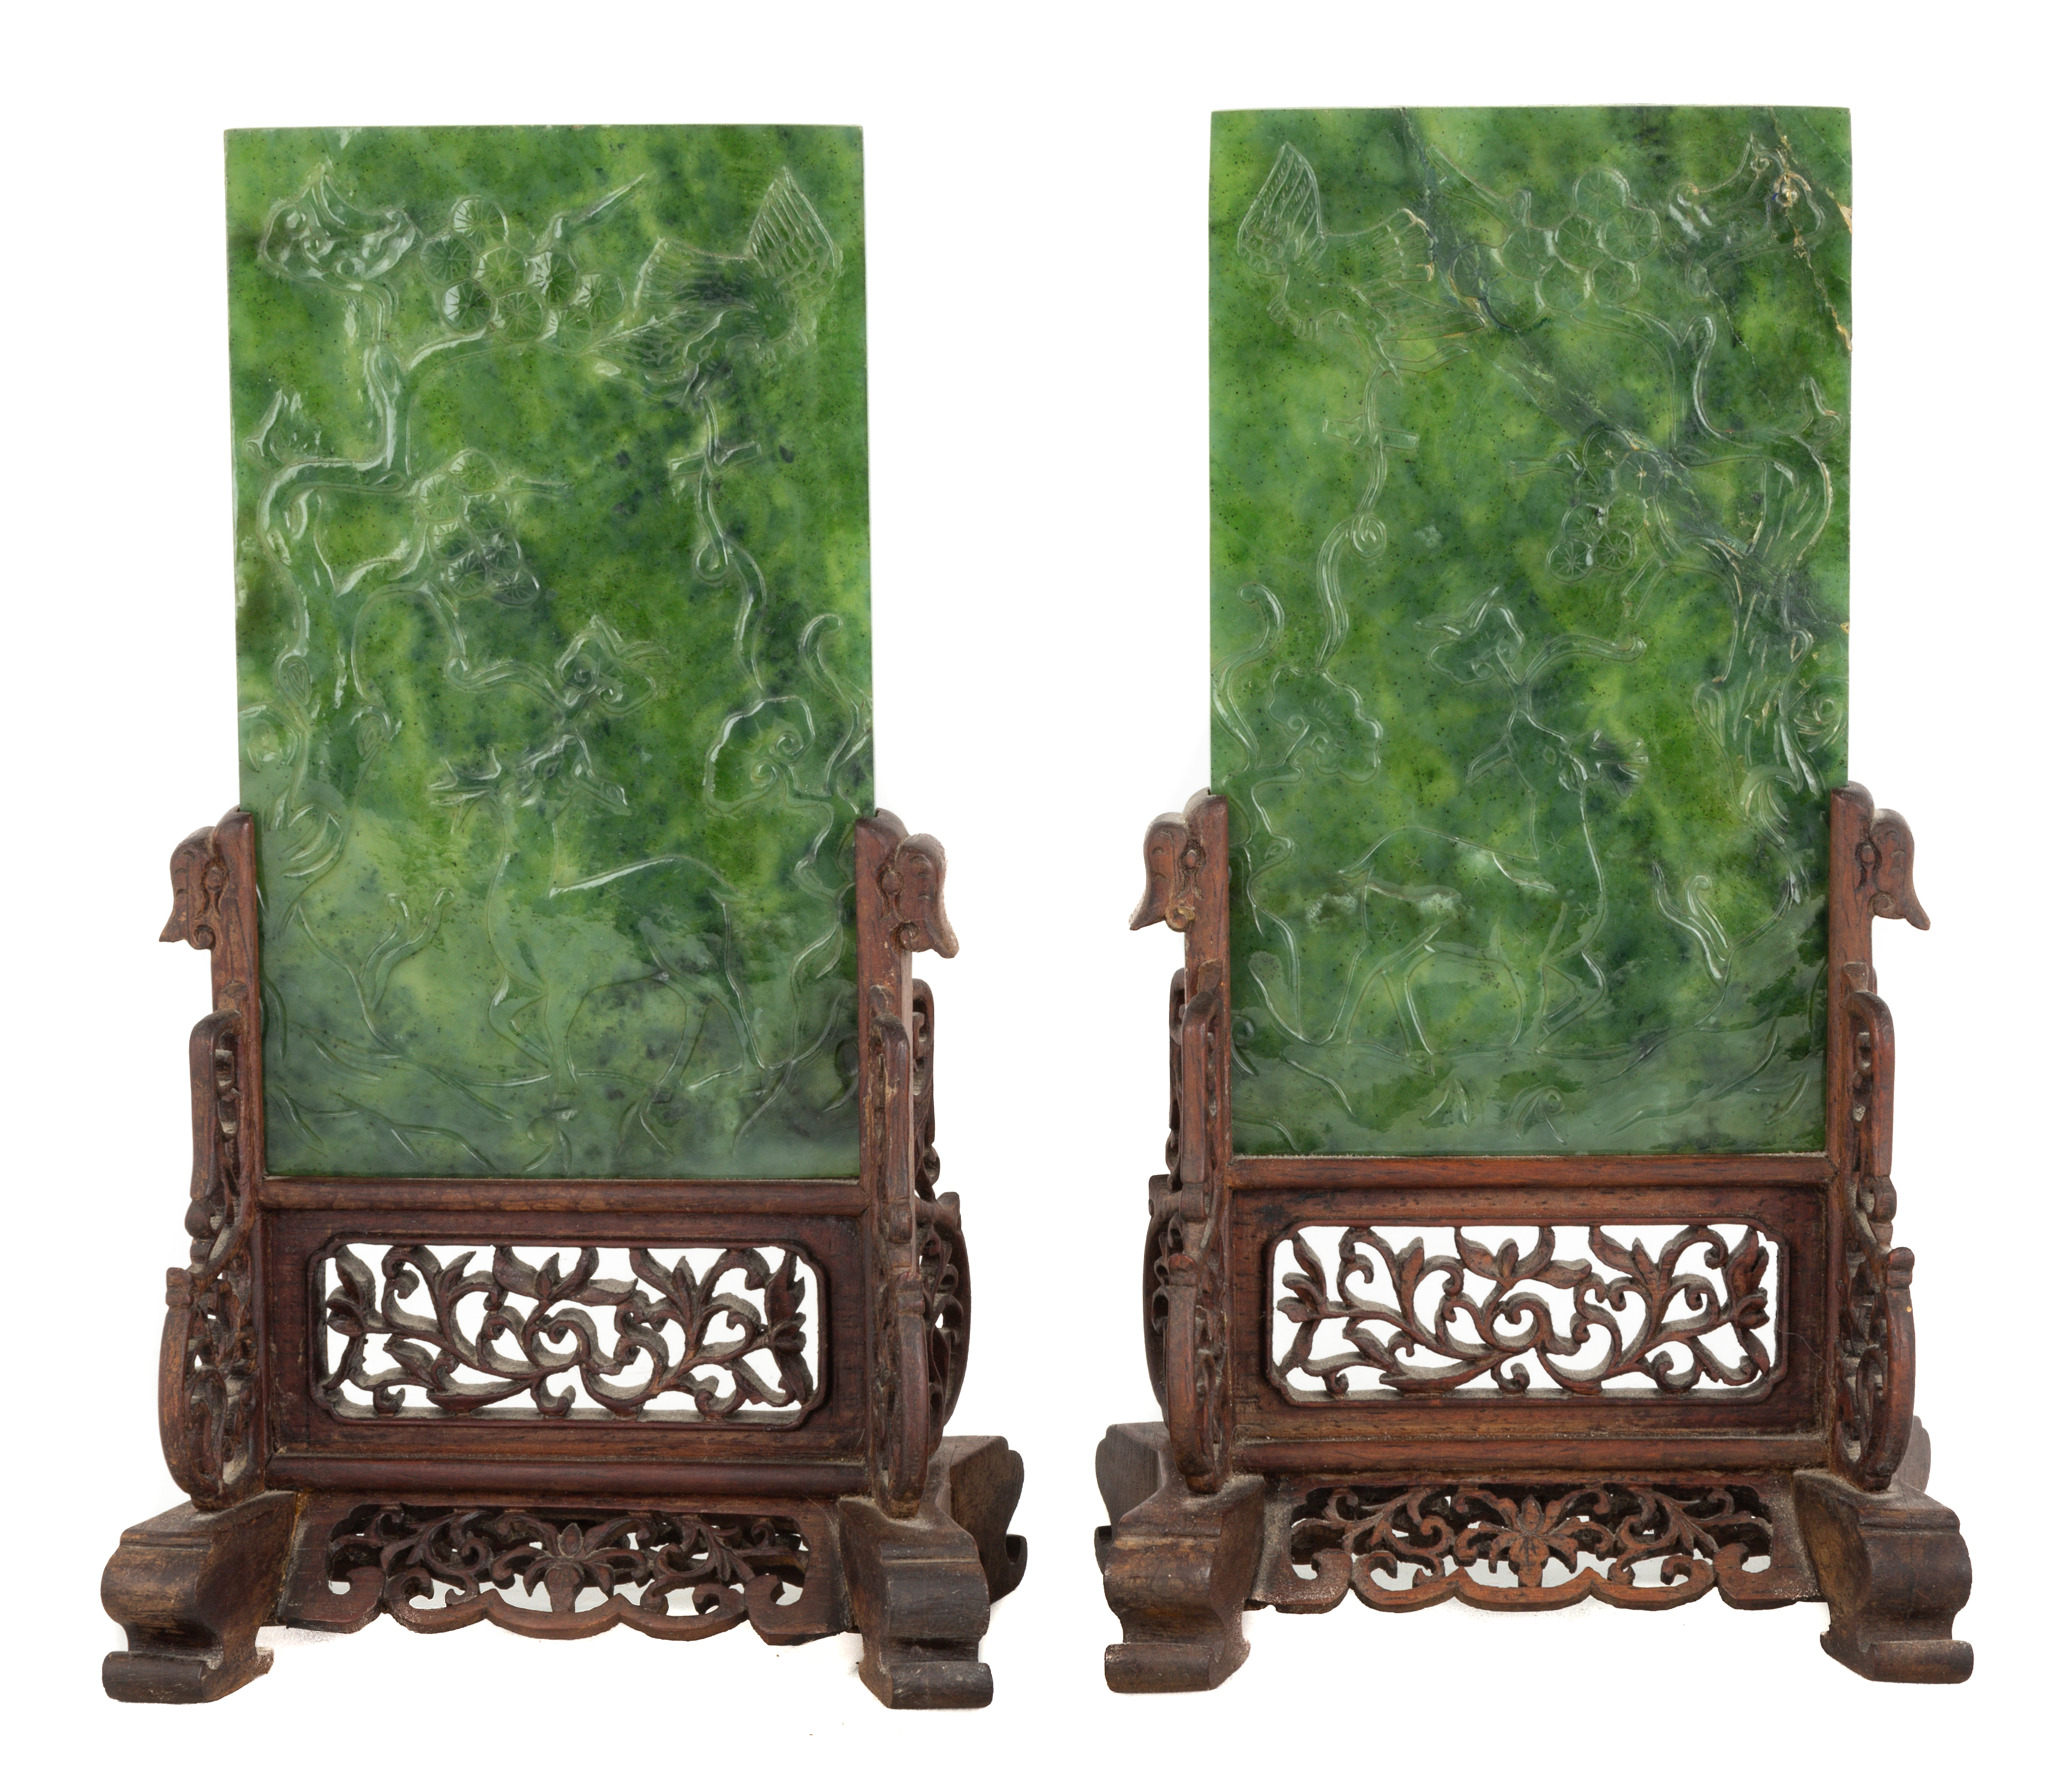 PAIR CARVED JADE CHINESE PLAQUES 2c877f